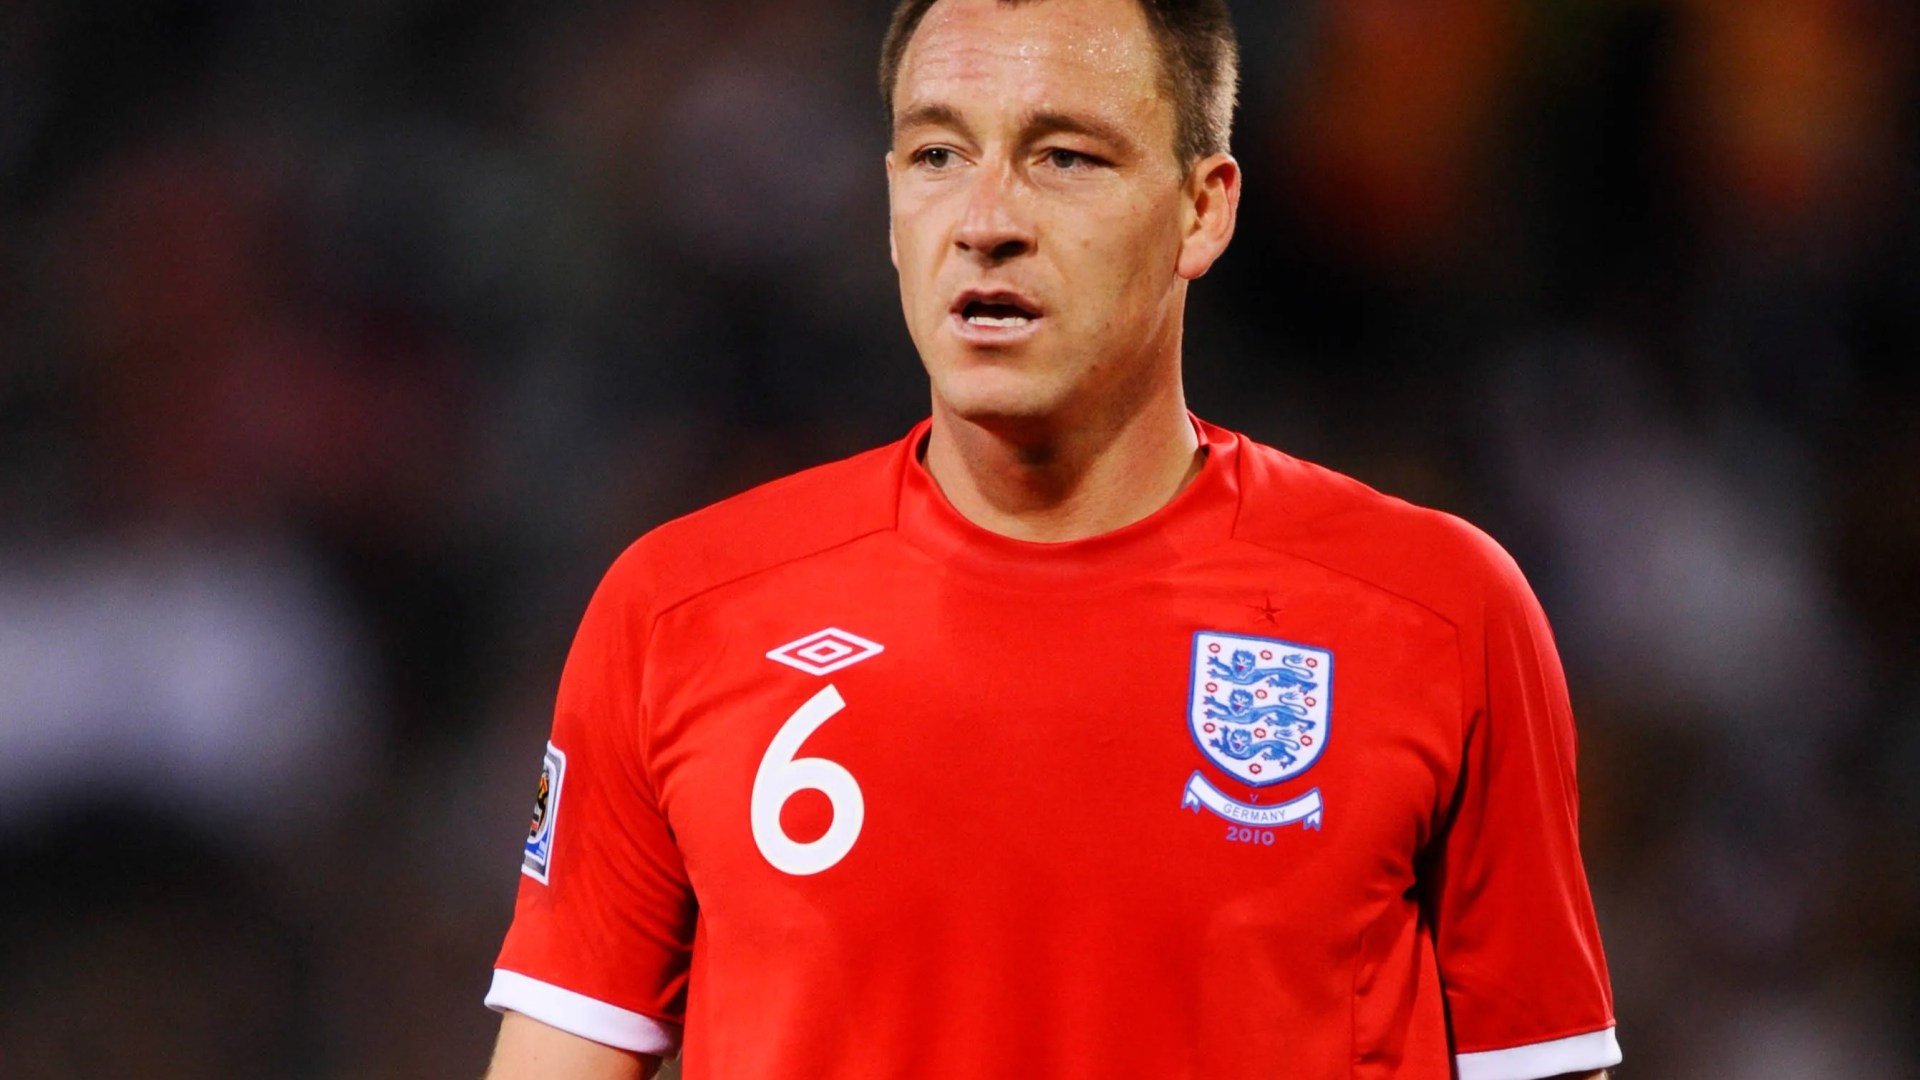 John Terry reveals bizarre reason he thinks England got knocked out of 2010 World Cup [Video]